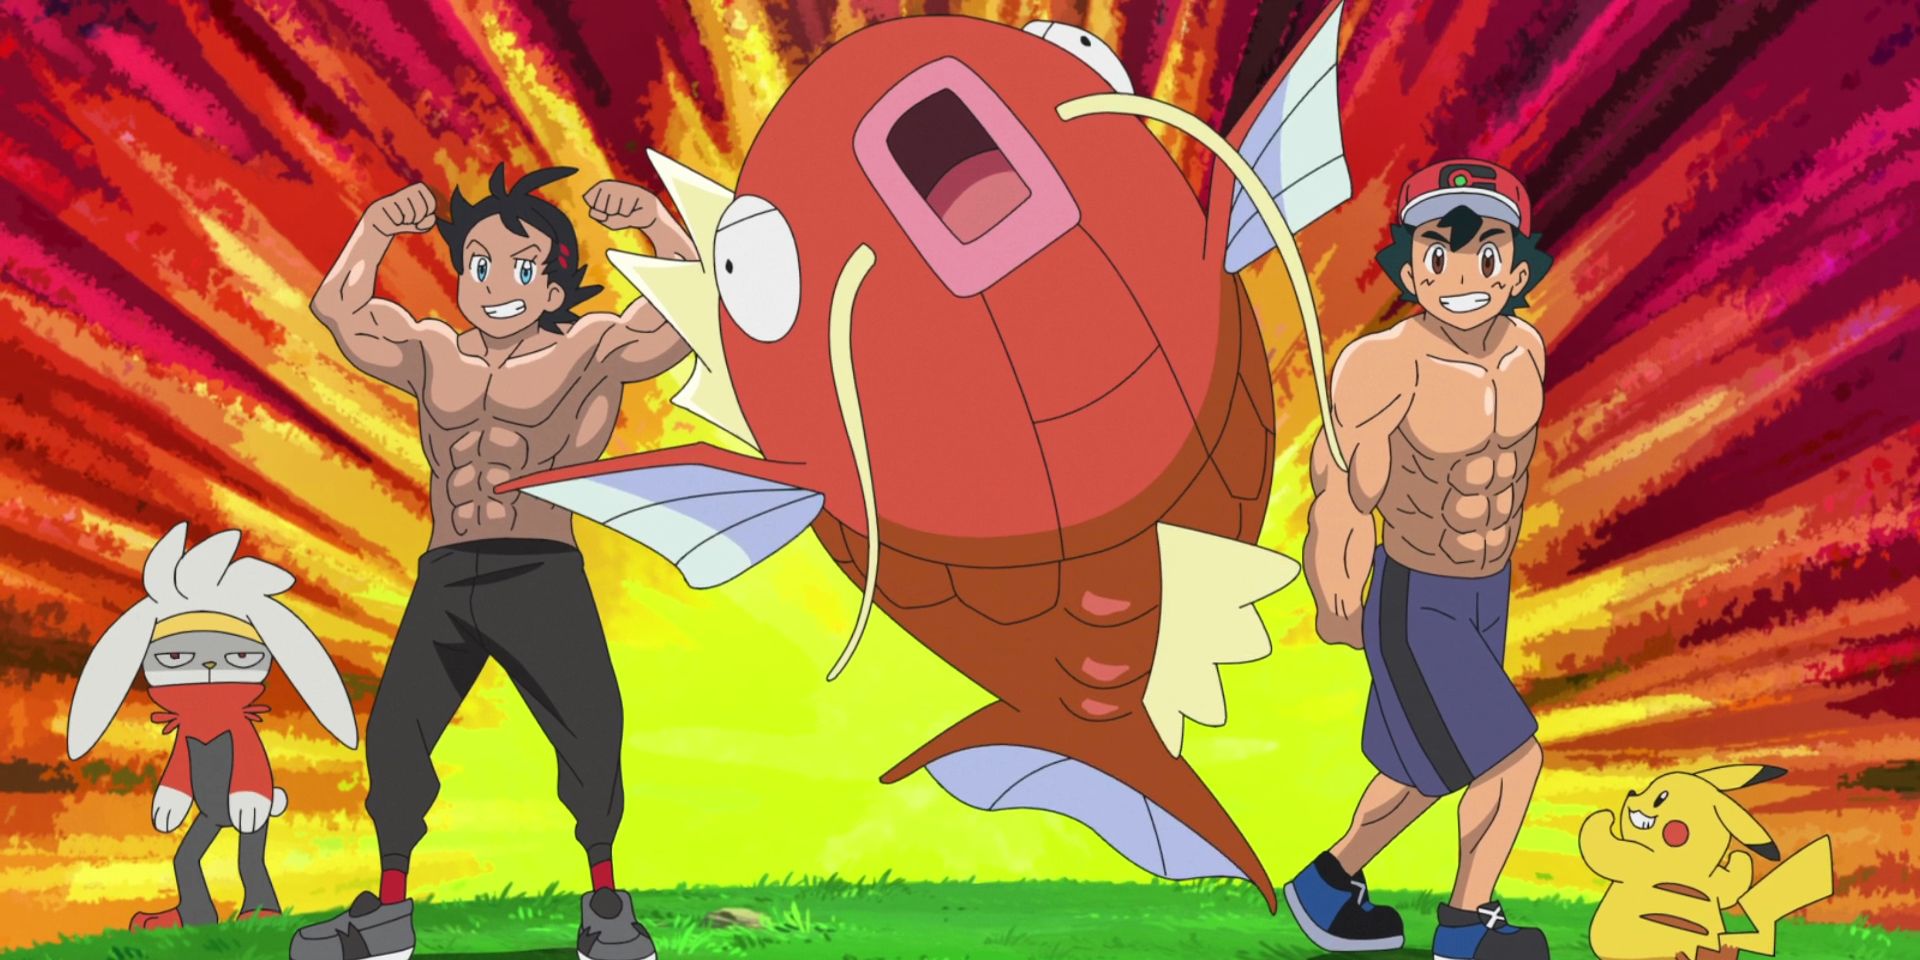 Pokémon Journeys Ash and Goh Get RIPPED in One of the Funniest Episodes Ever